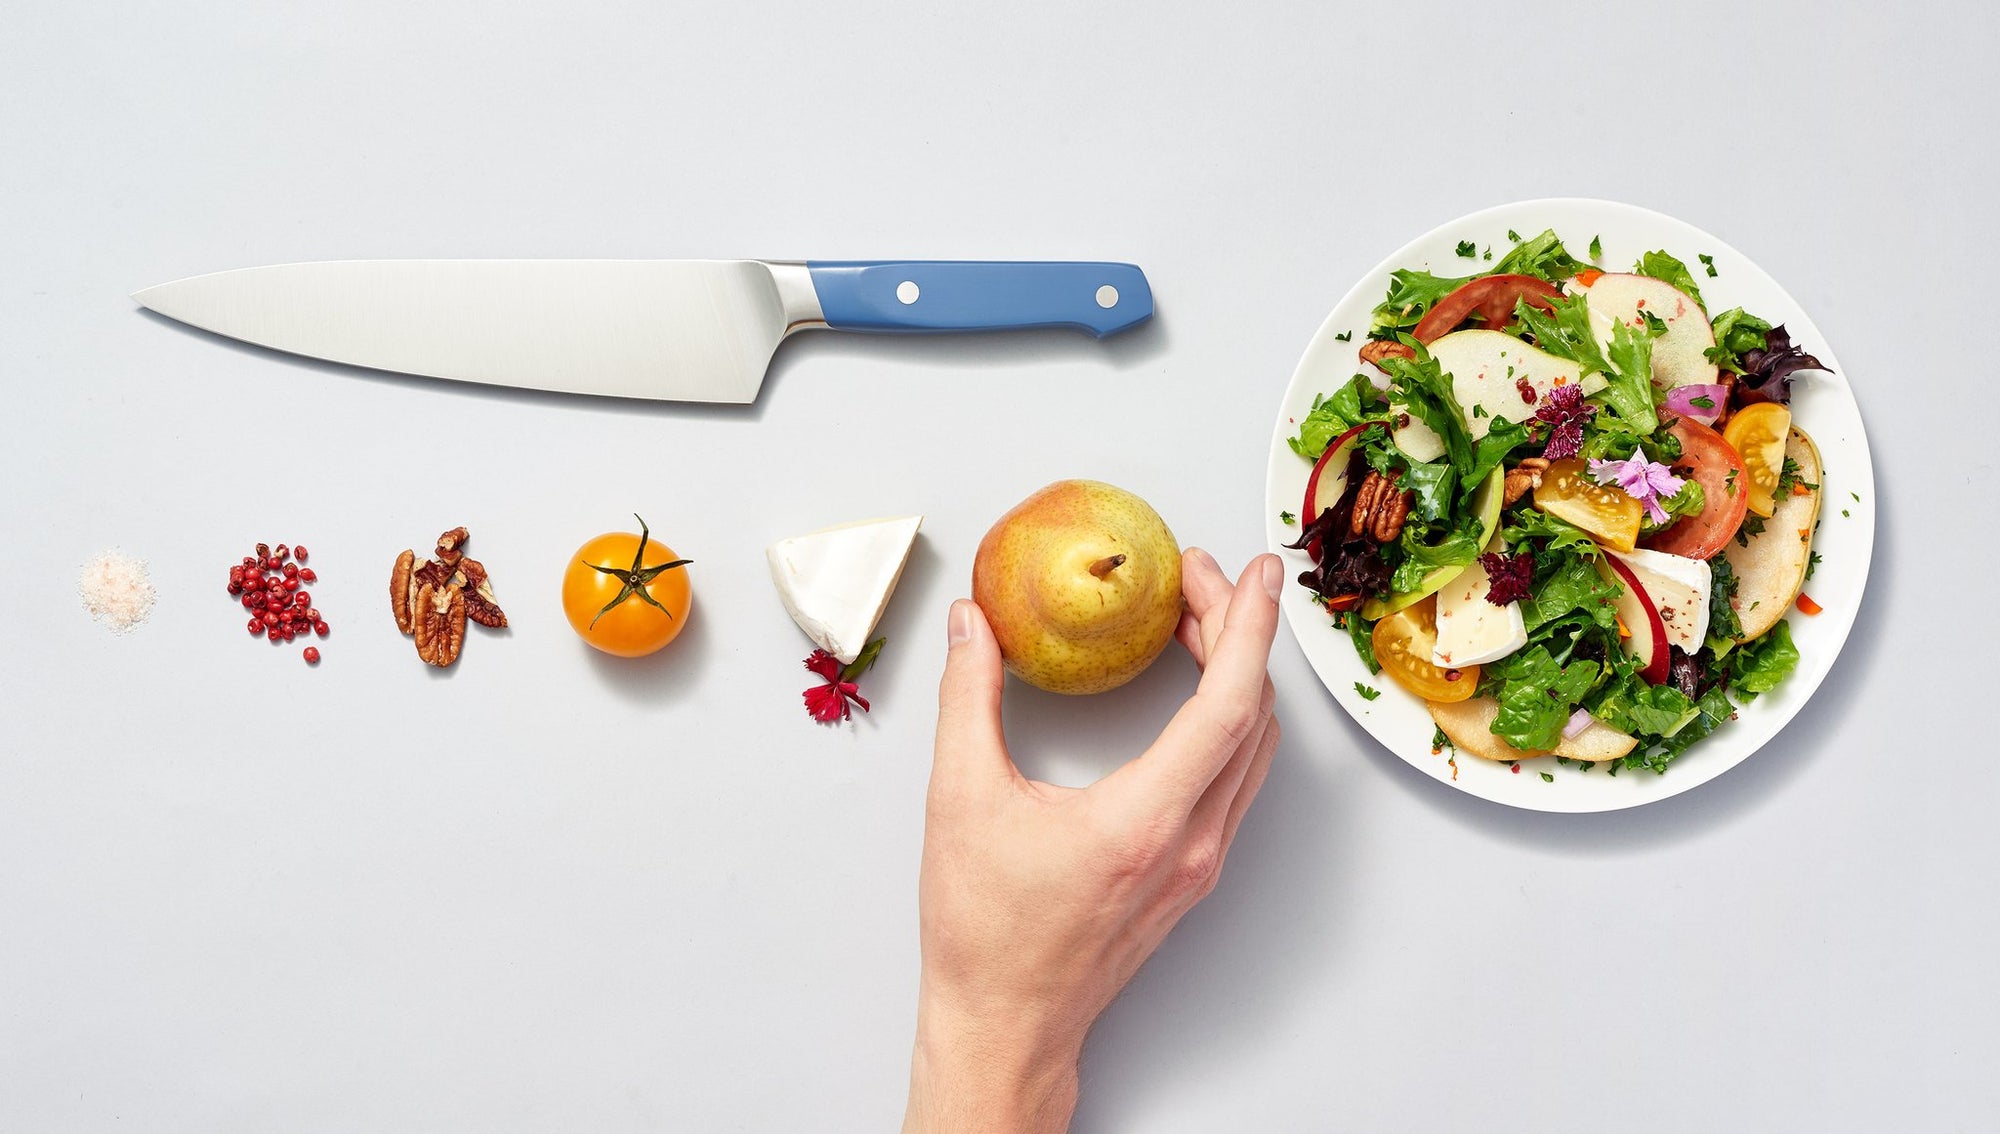 A Misen Chef's Knife with ingredients and a salad